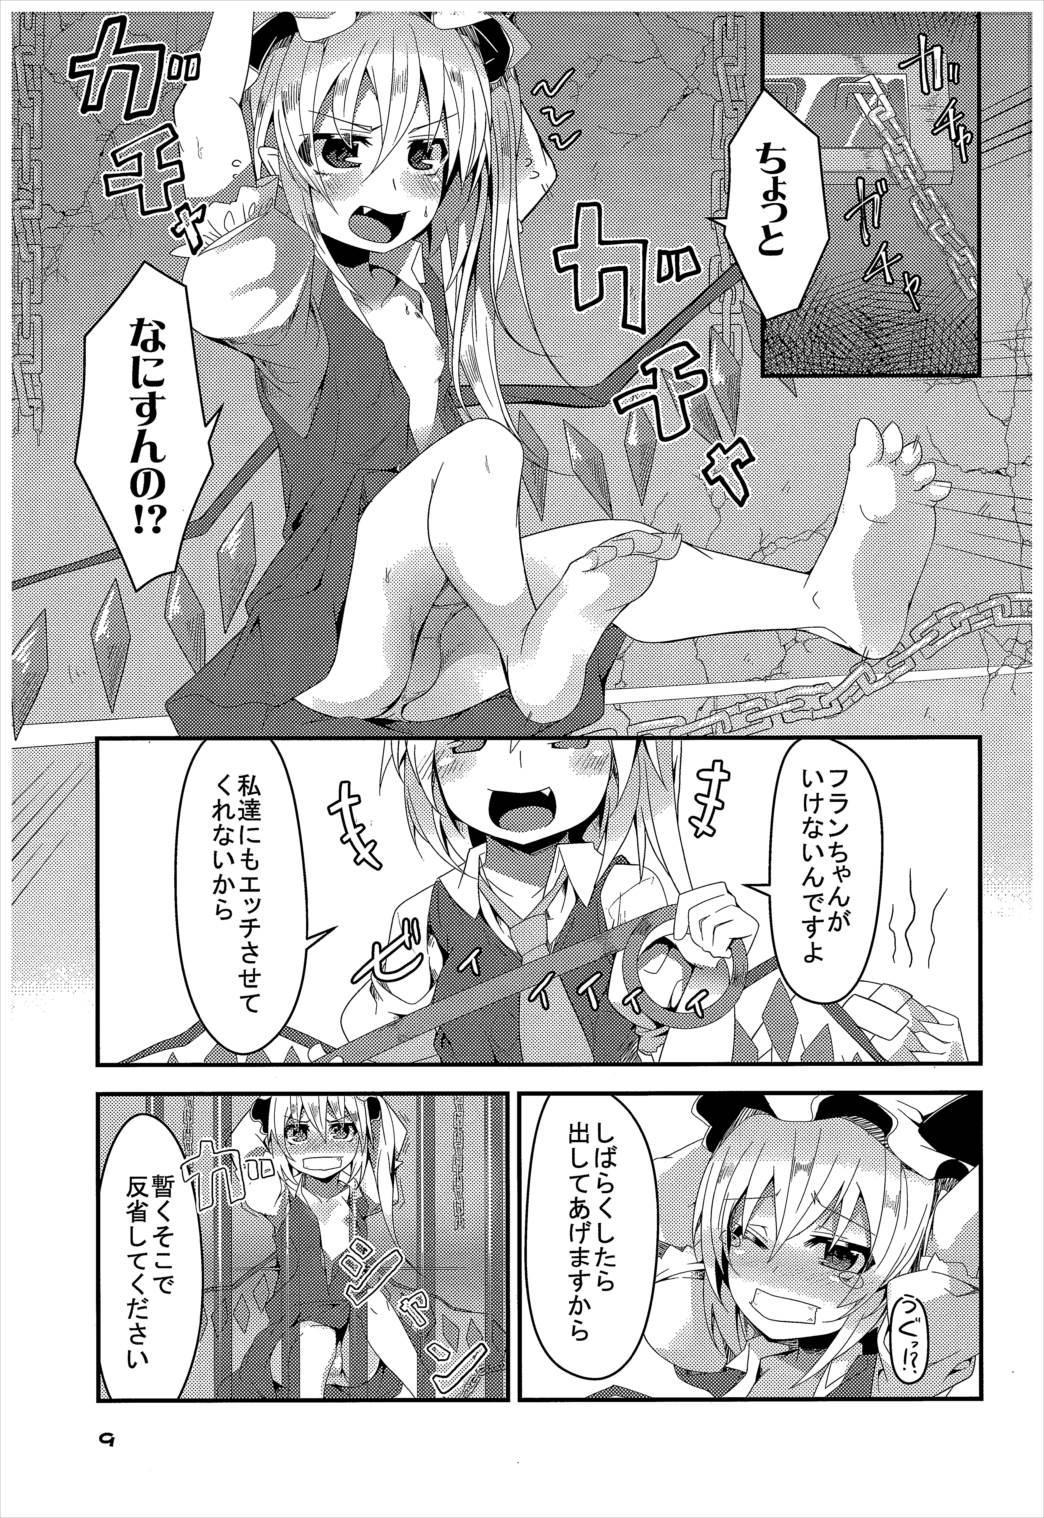 Point Of View Four of Flan-chan no Gyakushuu - Touhou project Atm - Page 8